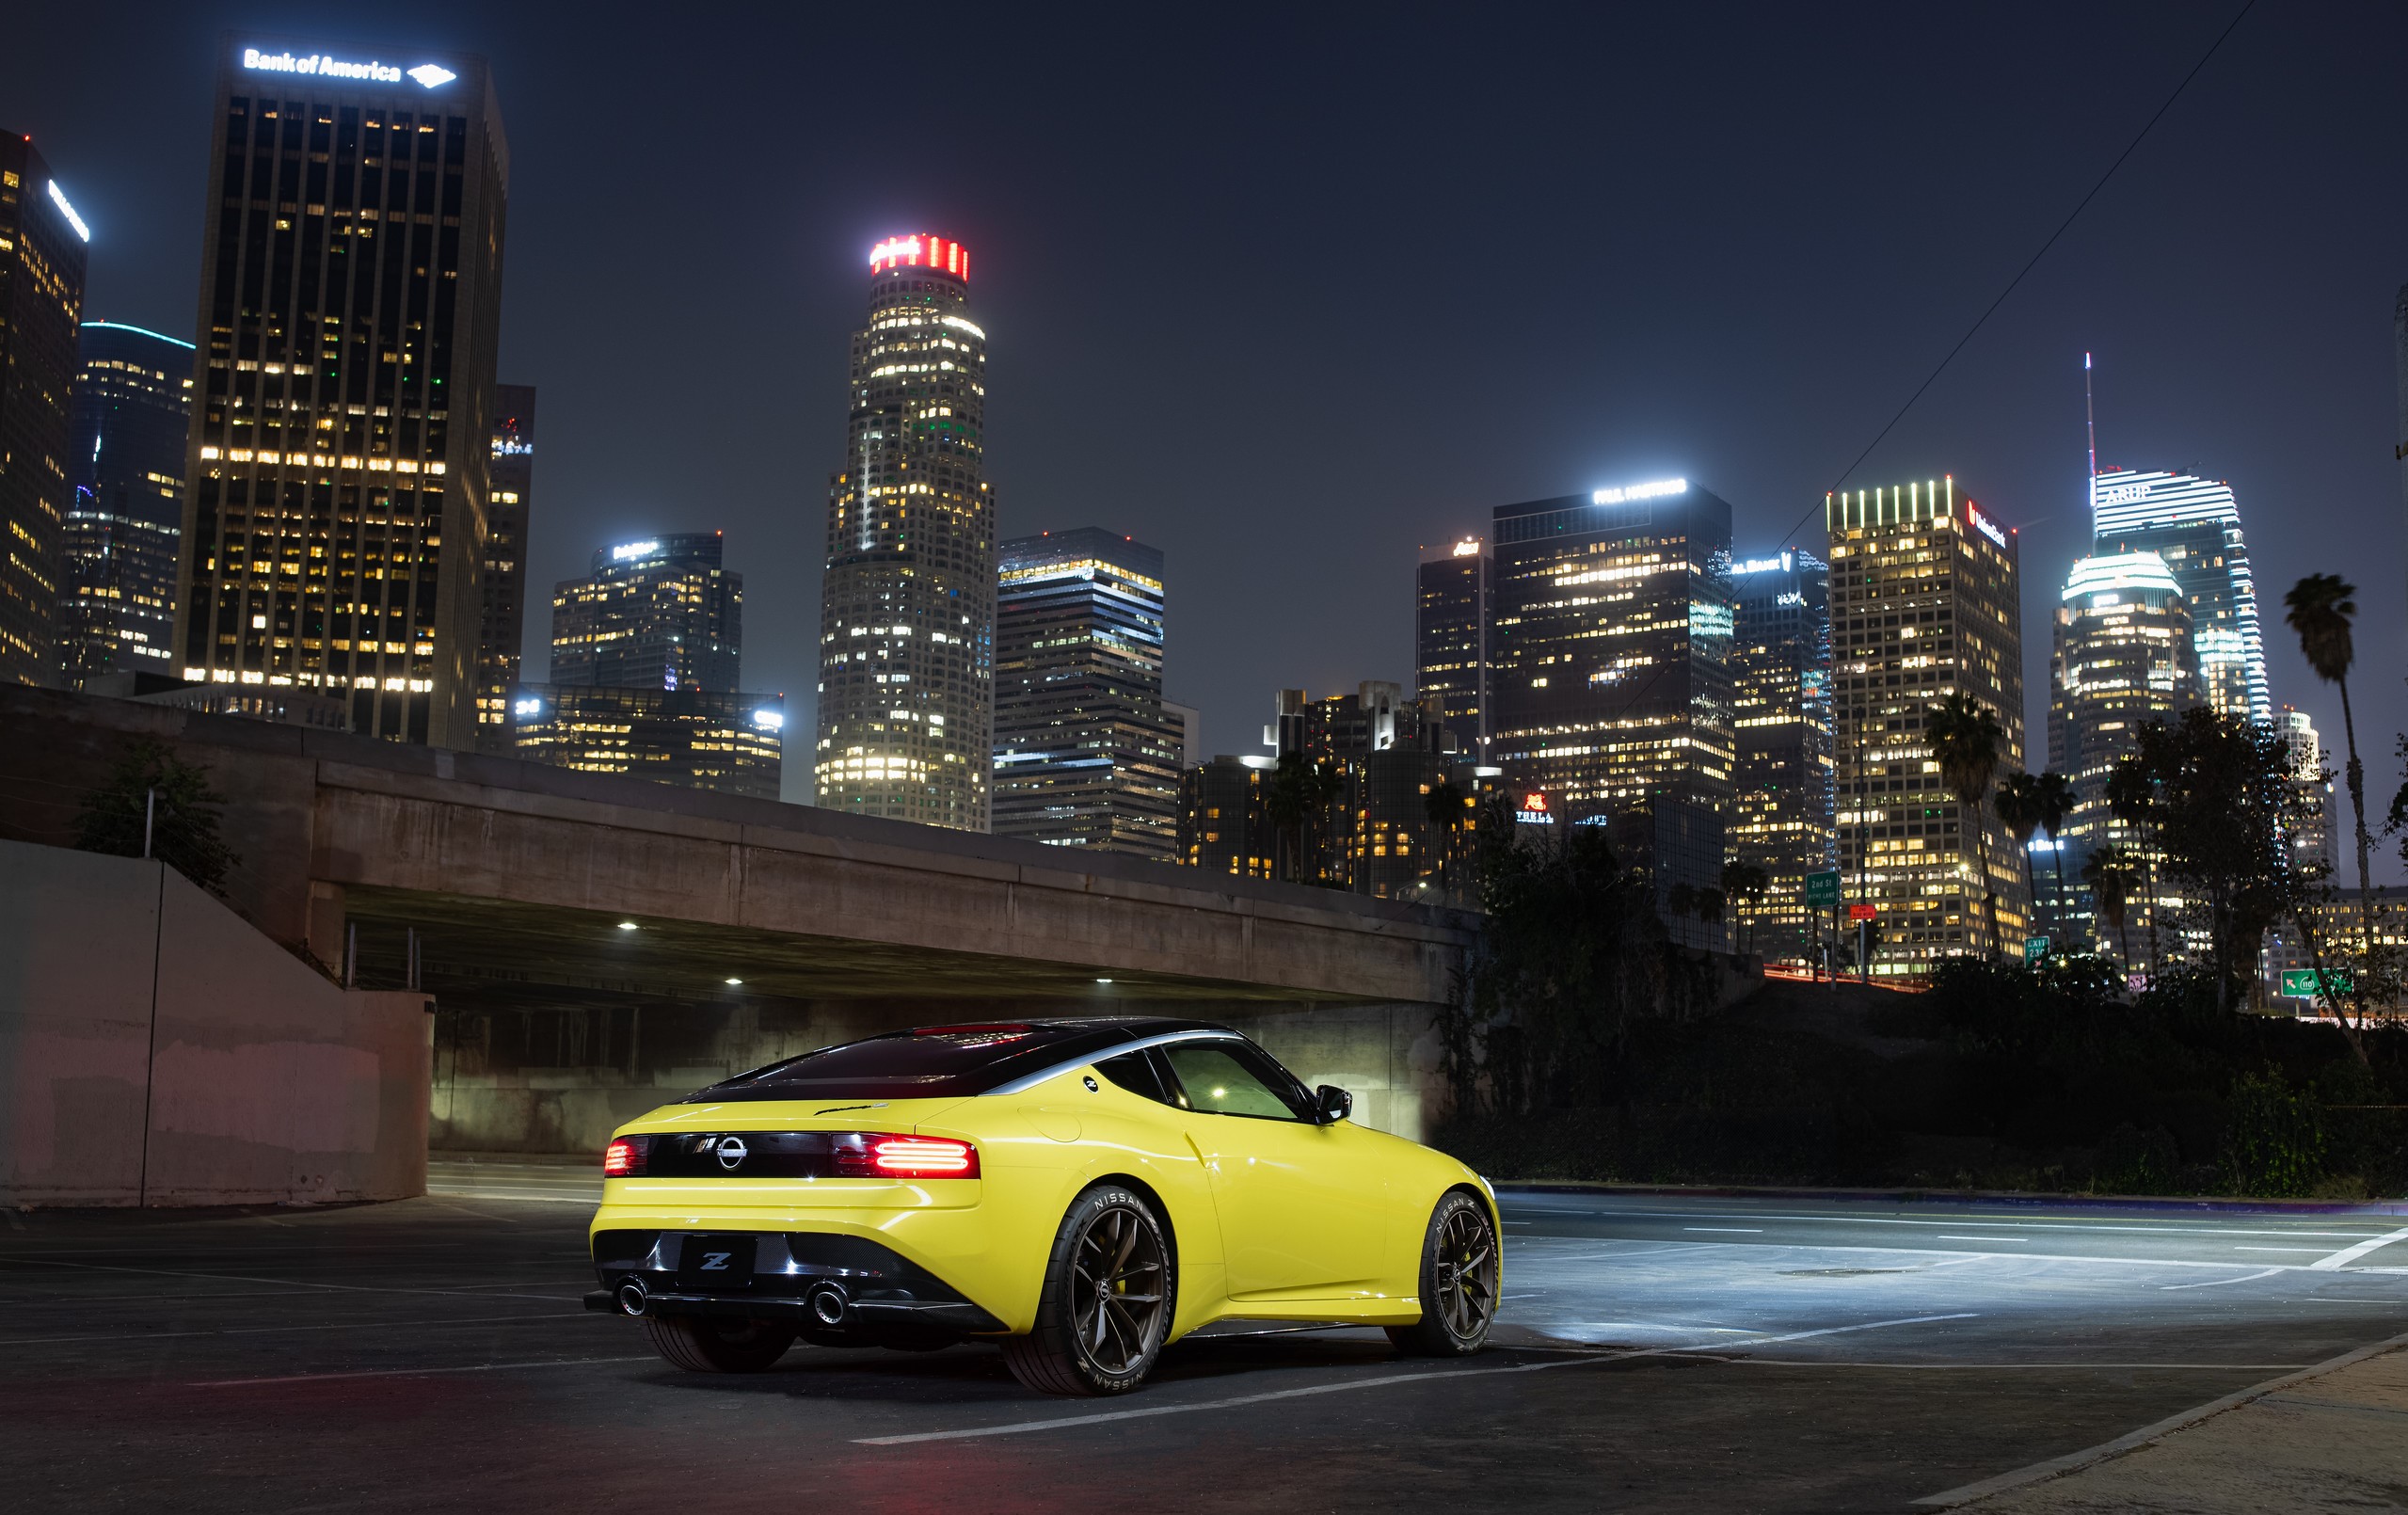 General 2559x1610 Nissan 400Z yellow cars Japanese cars sports car city city lights night Larry Chen Nissan rear view taillights building skyscraper headlights vehicle